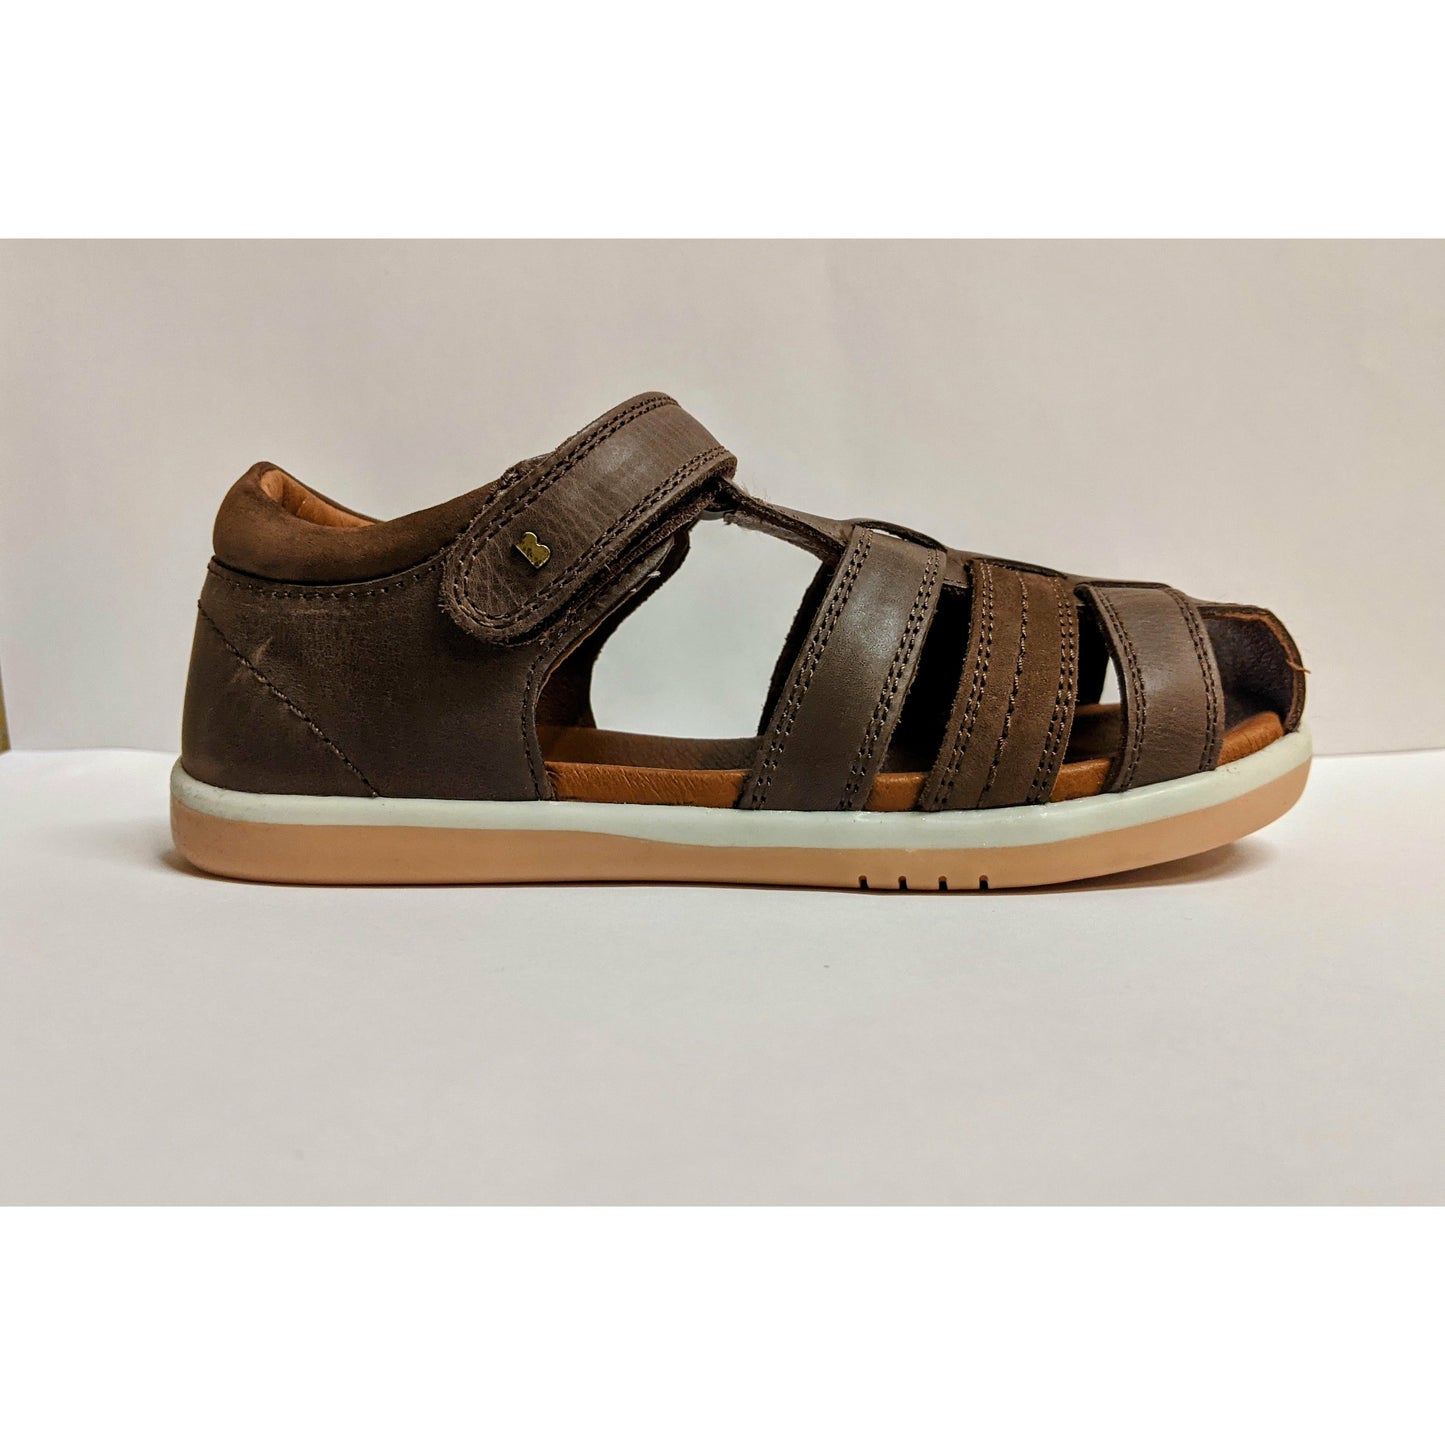 A boys brown closed toe sandal by Bobux,style Roam,in brown with velcro fastening. Right side view.